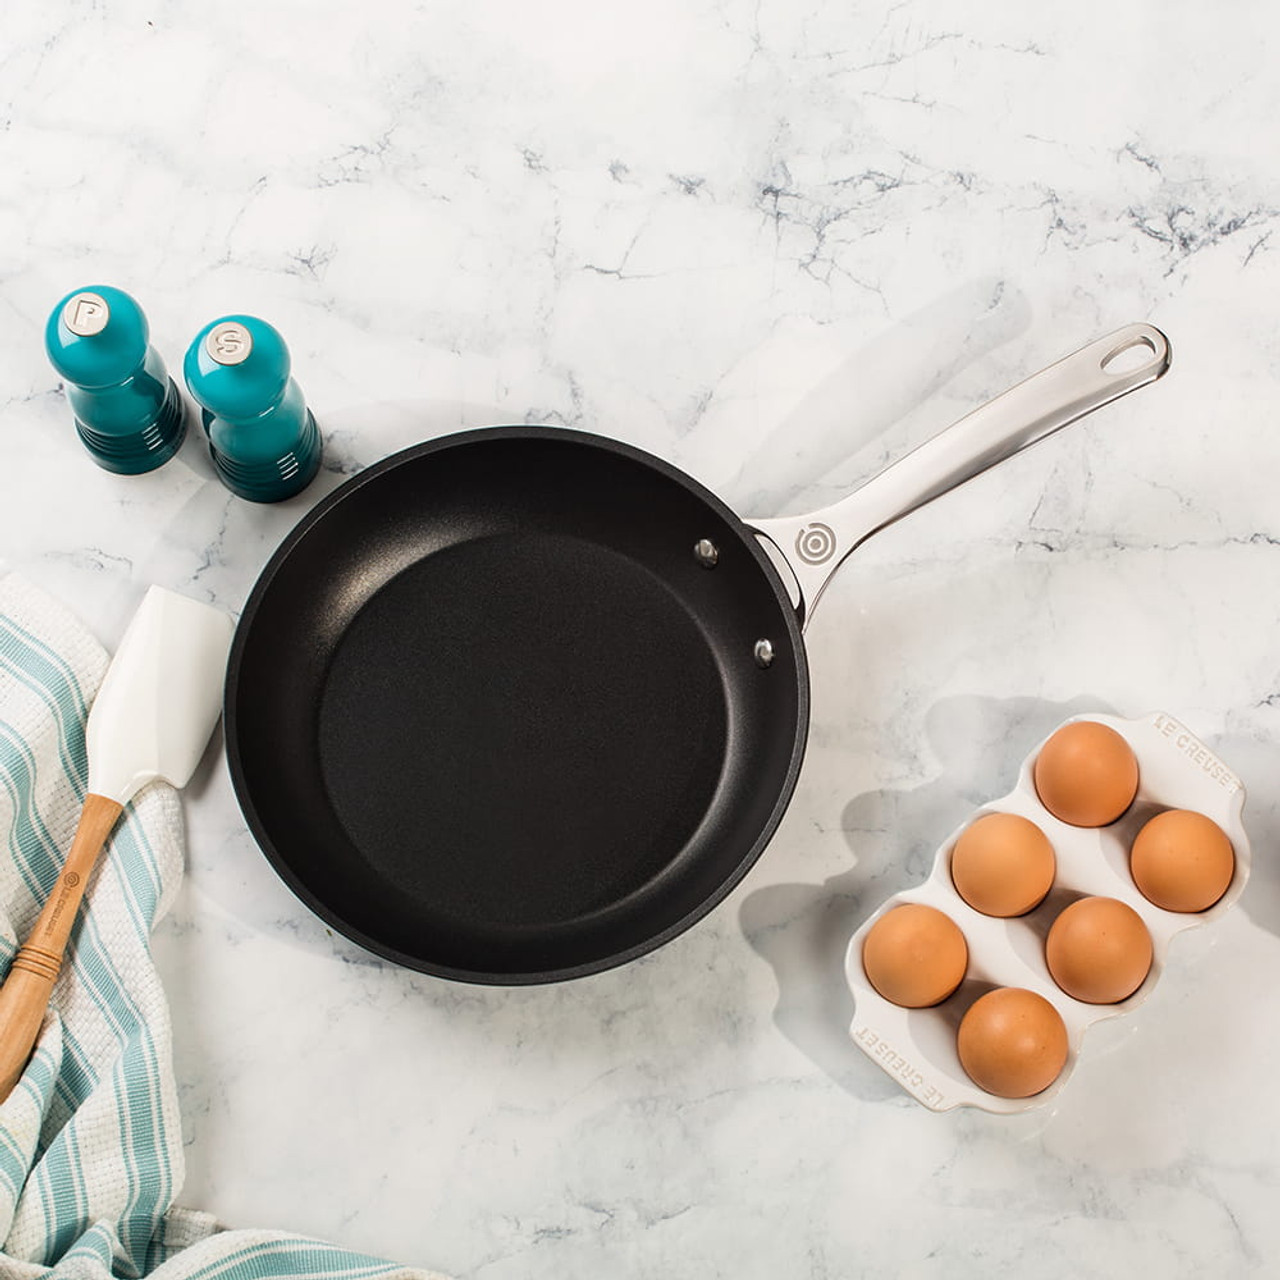 https://cdn11.bigcommerce.com/s-hccytny0od/images/stencil/1280x1280/products/3293/11802/le-creuset-tns-pro-fry-pan-1__33202.1593204011.jpg?c=2?imbypass=on